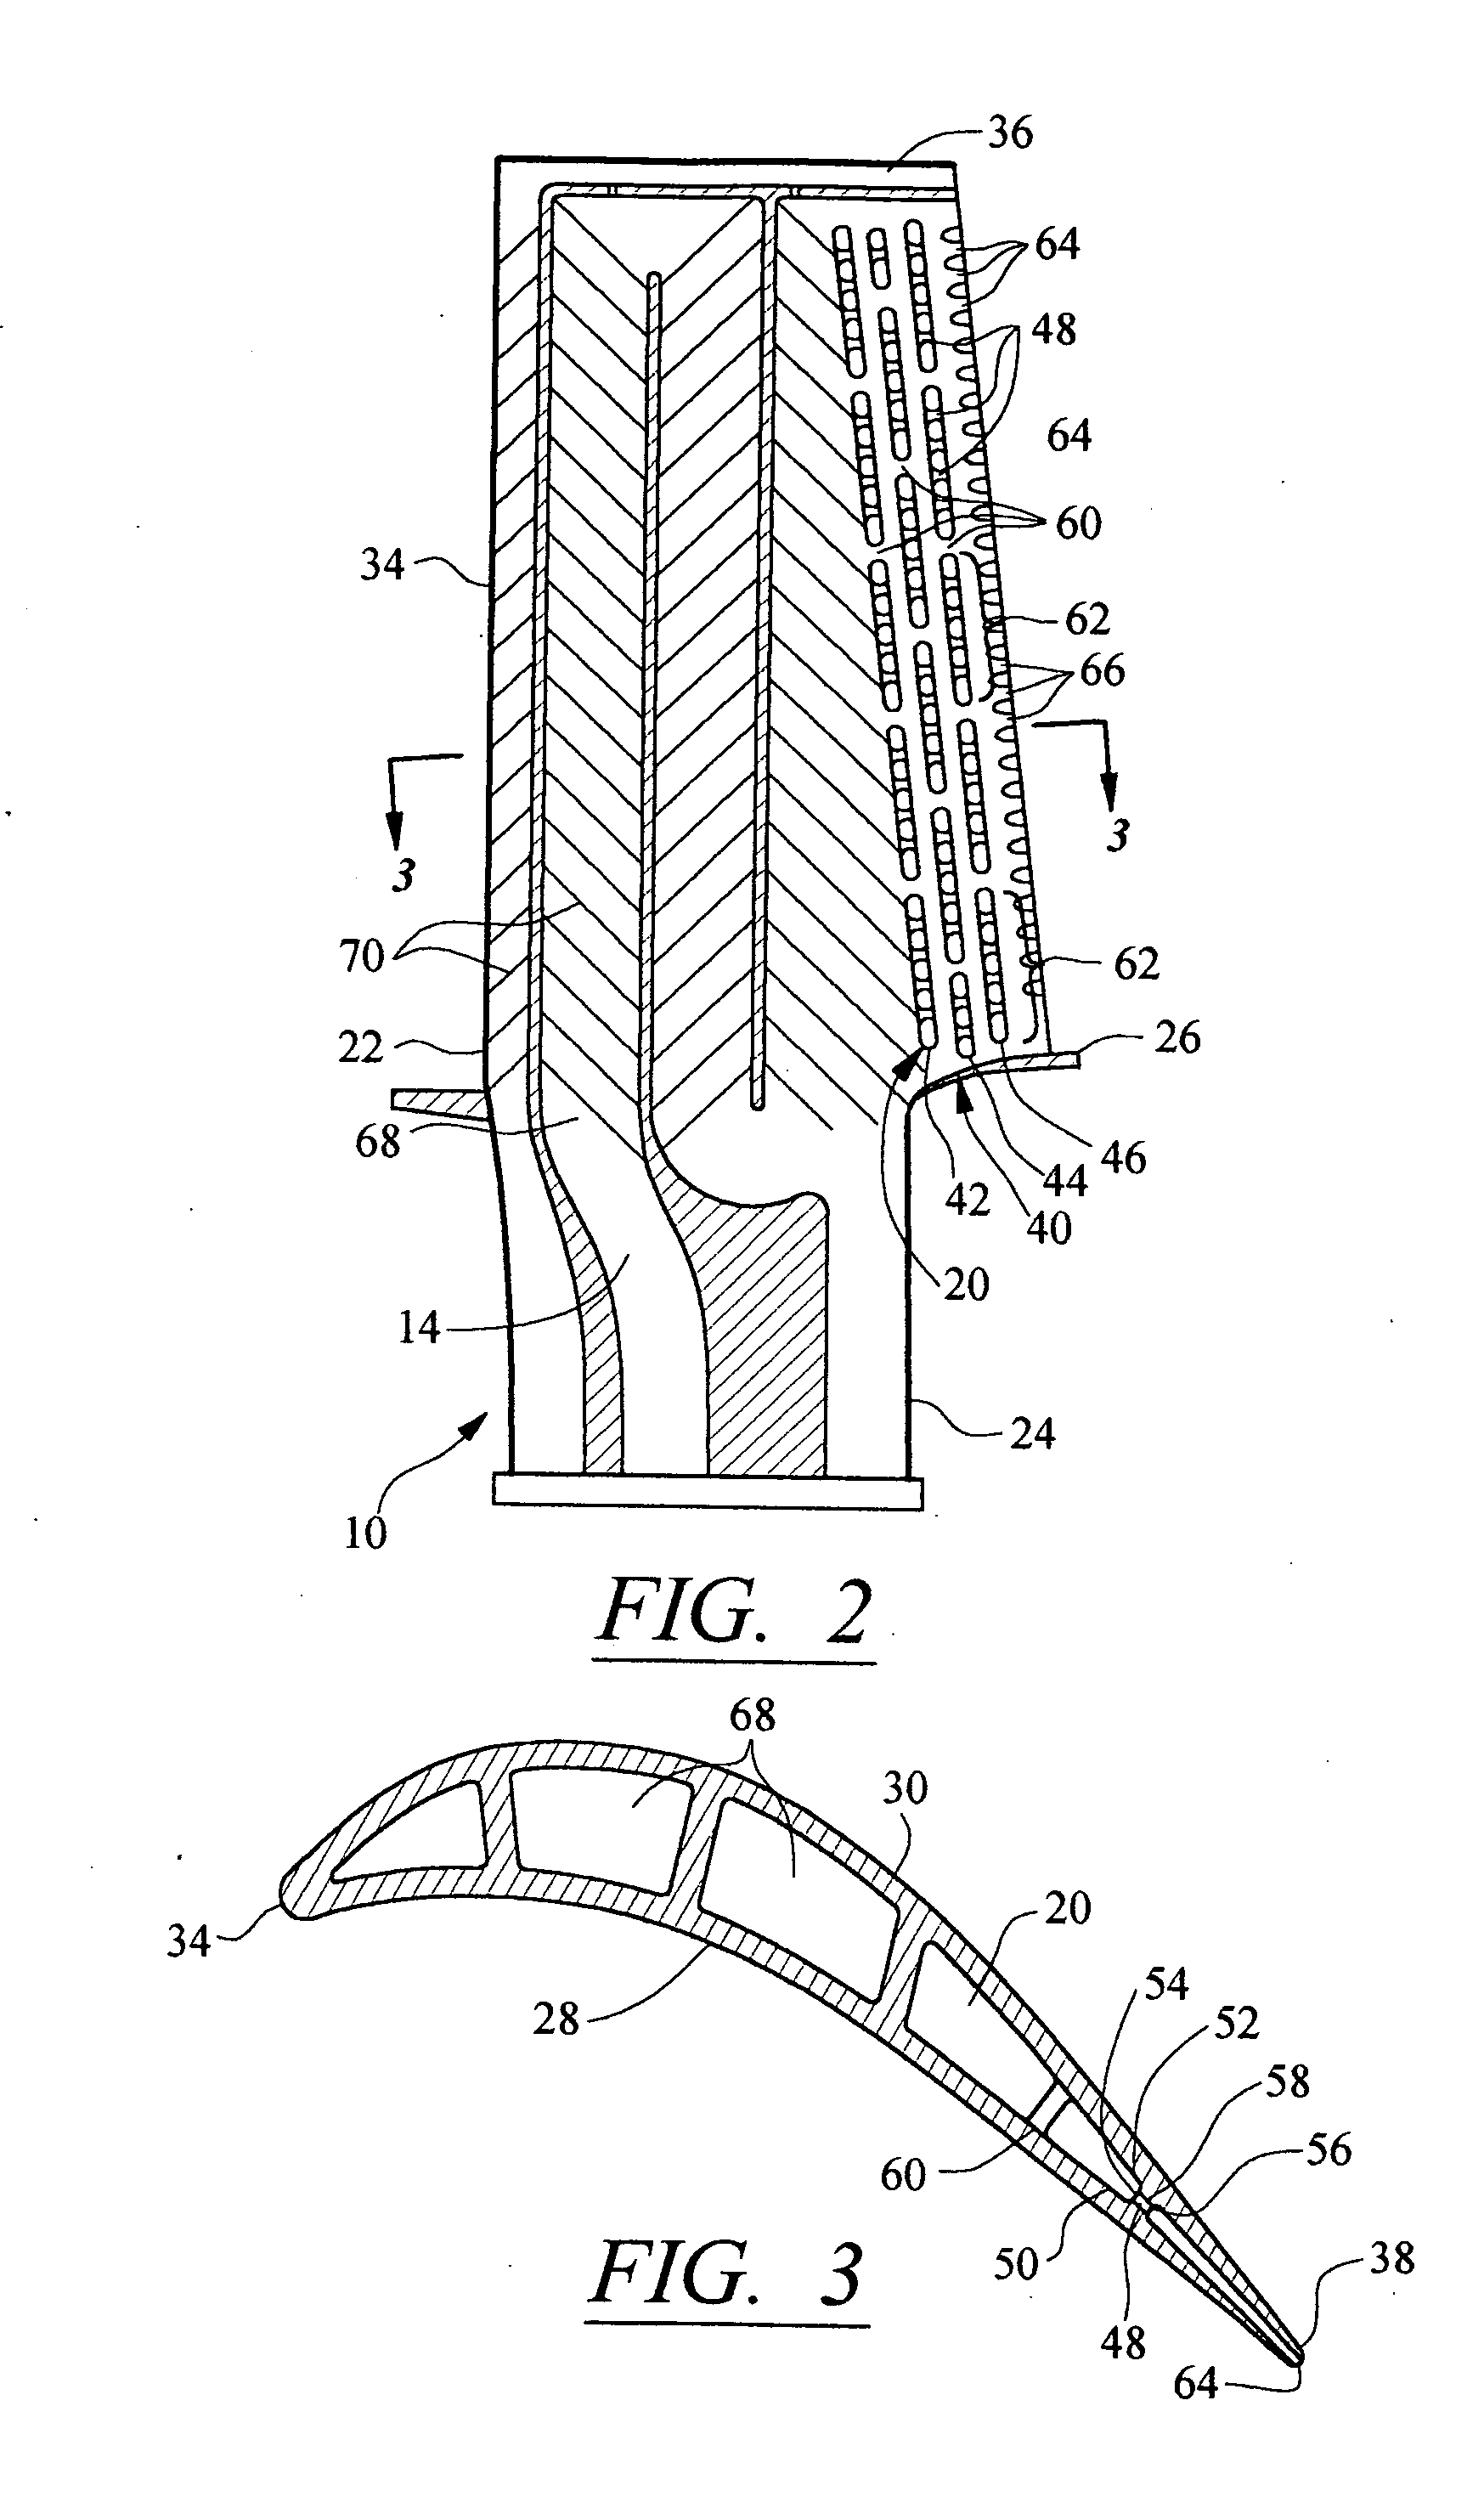 Turbine airfoil trailing edge cooling system with segmented impingement ribs